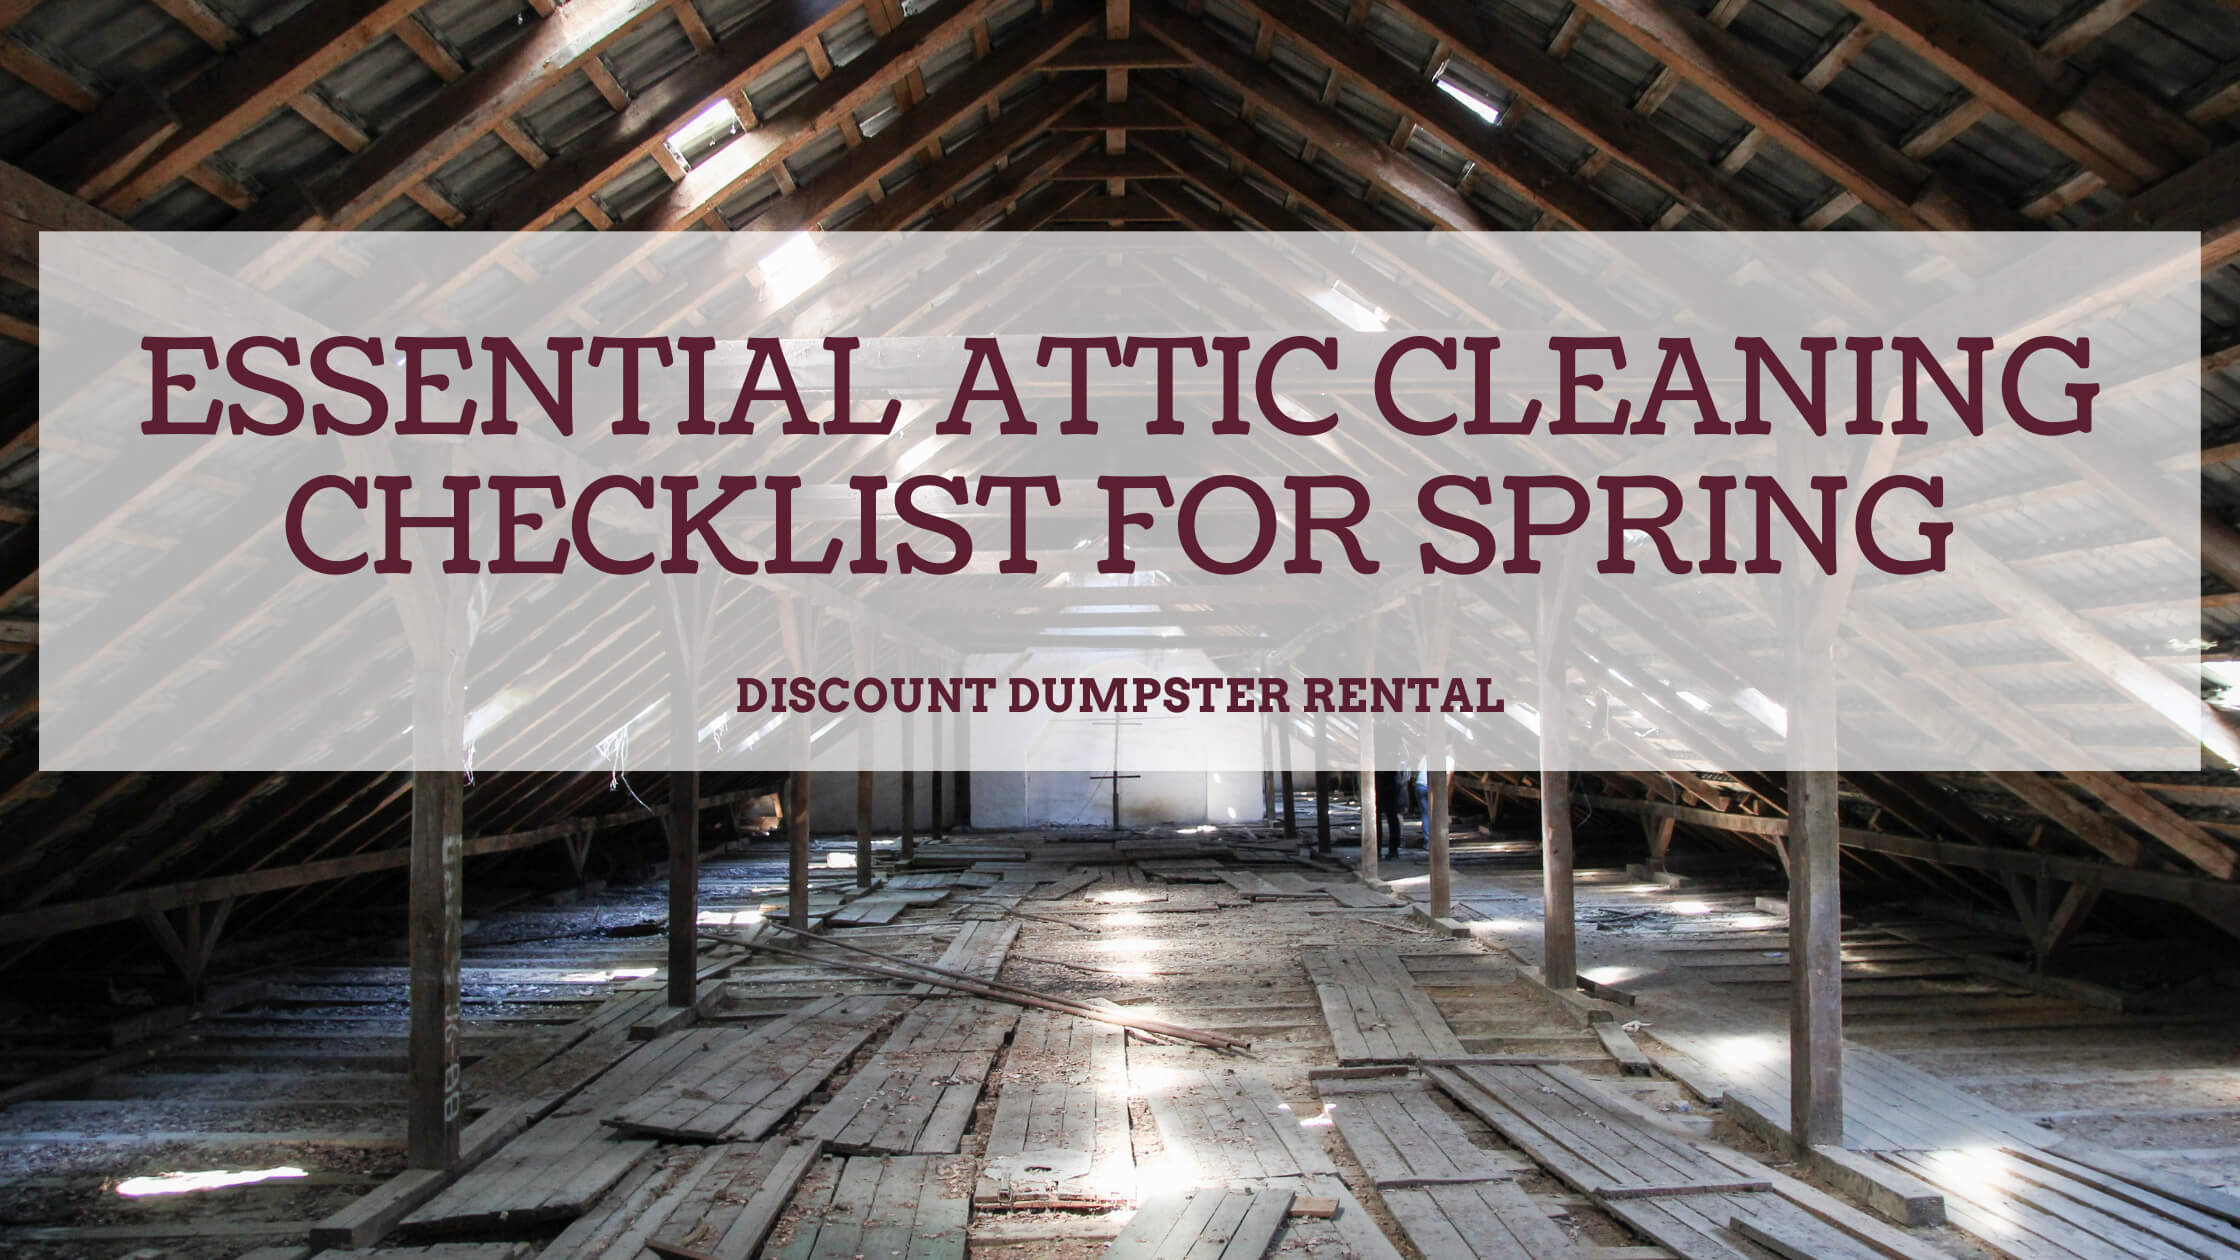 https://discountdumpsterco.com/wp-content/uploads/Essential-Attic-Cleaning-Checklist-for-Spring-Blog-Banner.jpg